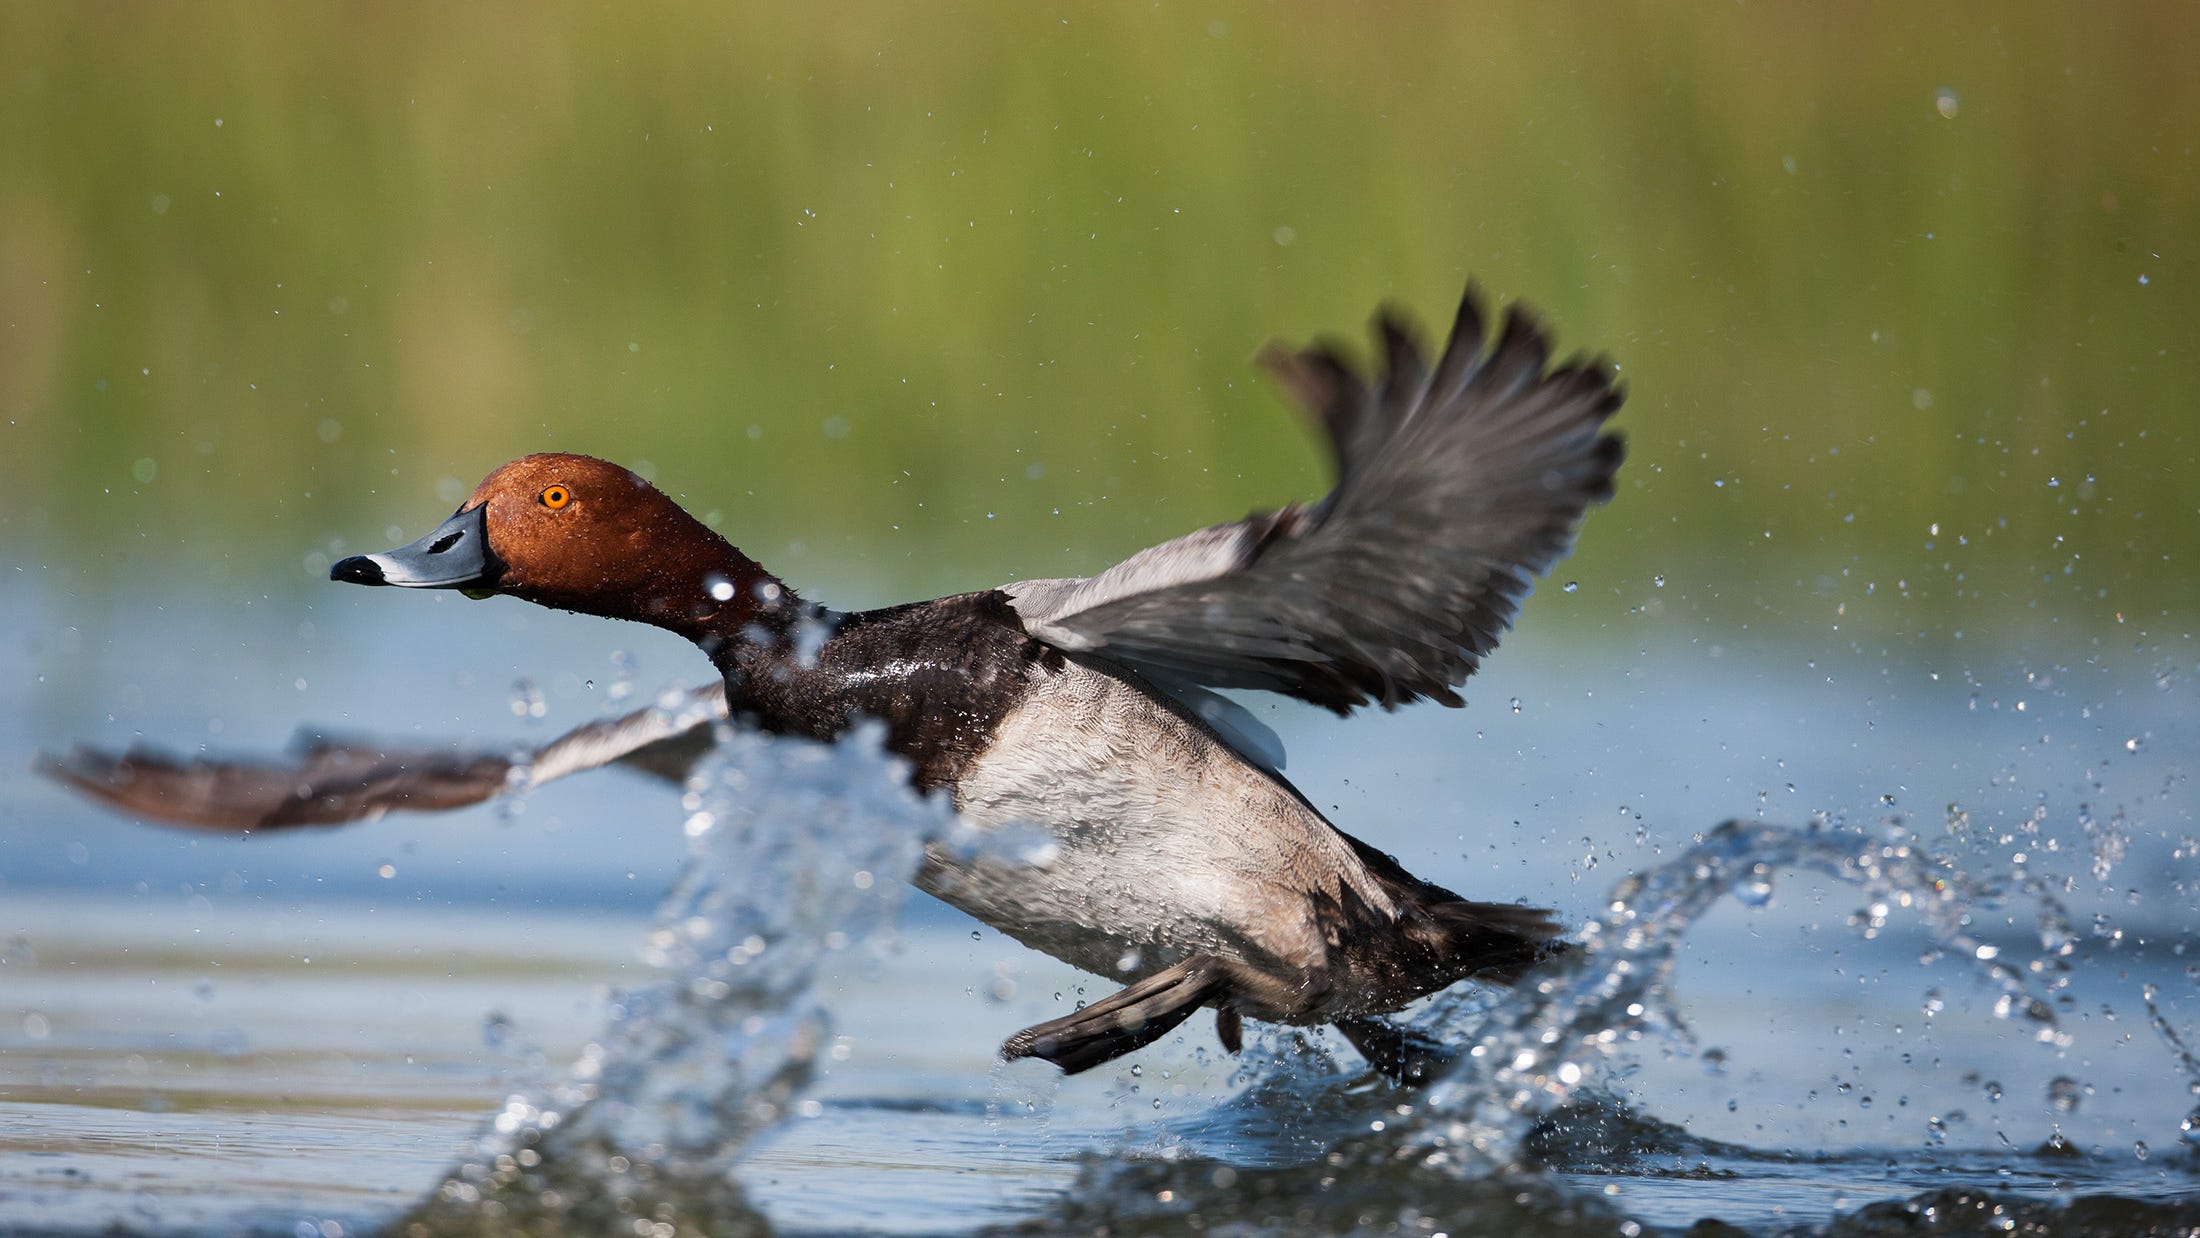 Western drought disrupts Nevada duck migration